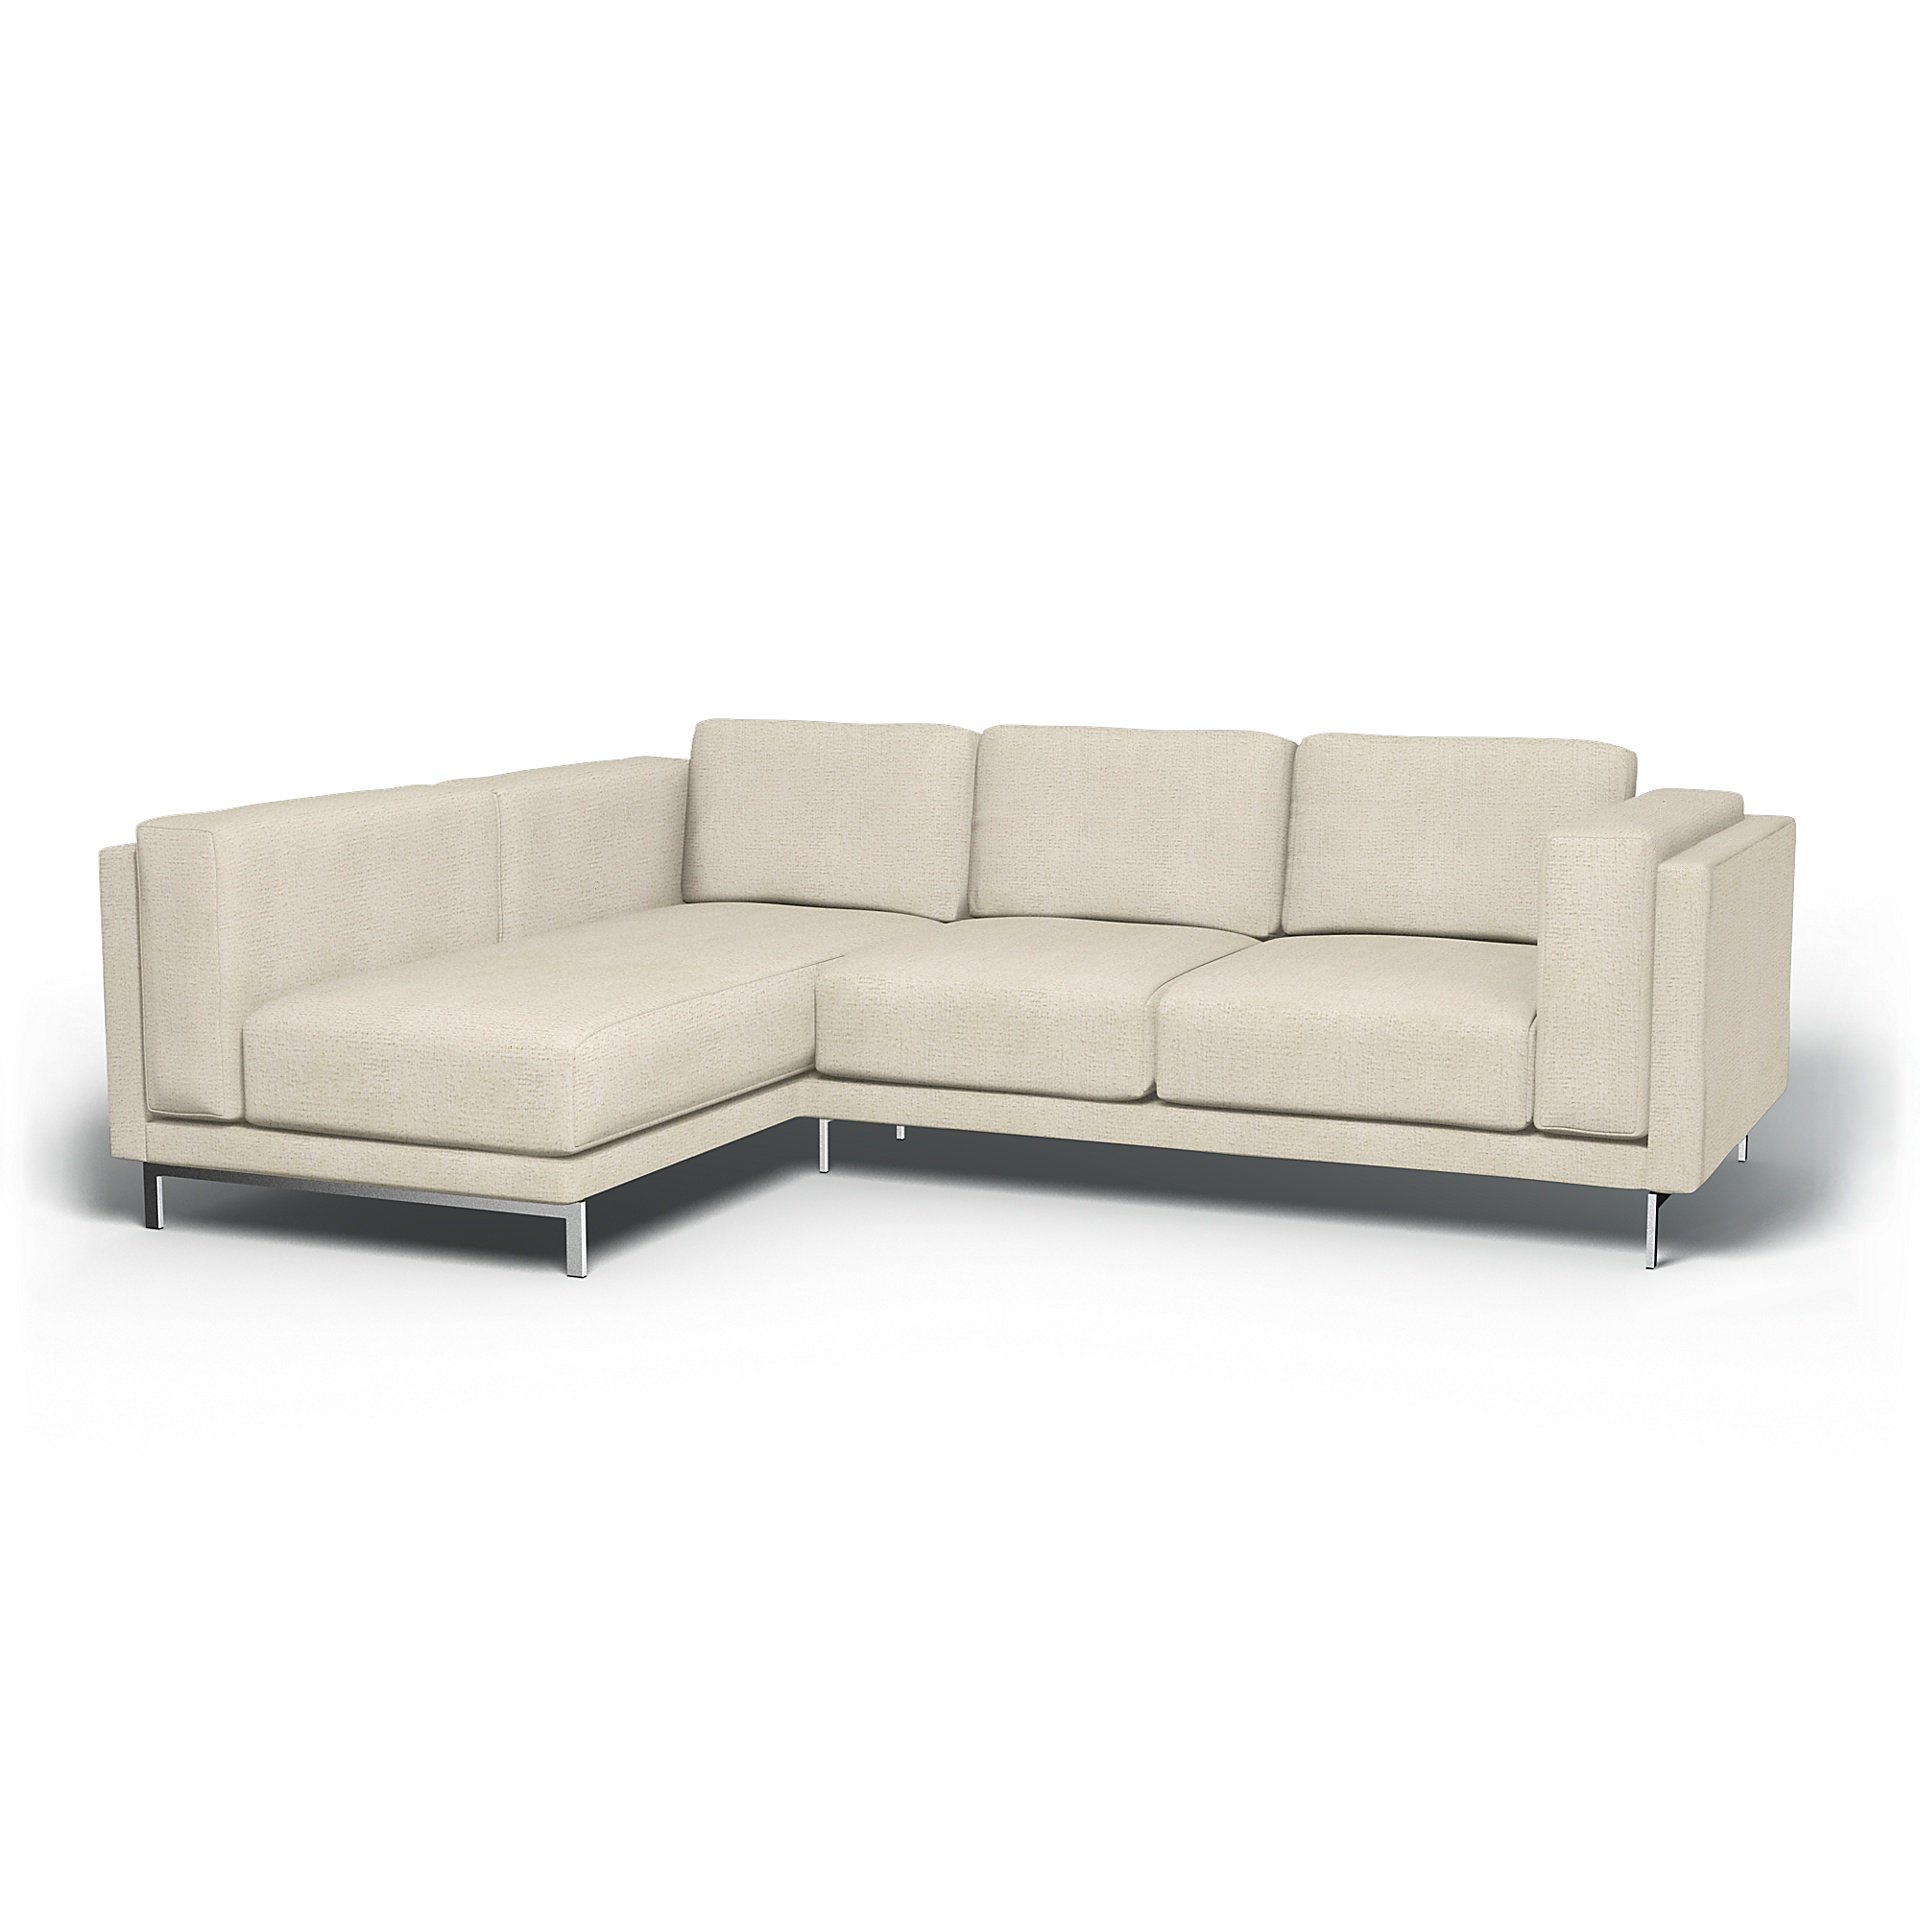 IKEA - Nockeby 3 Seater Sofa with Left Chaise Cover, Ecru, Boucle & Texture - Bemz